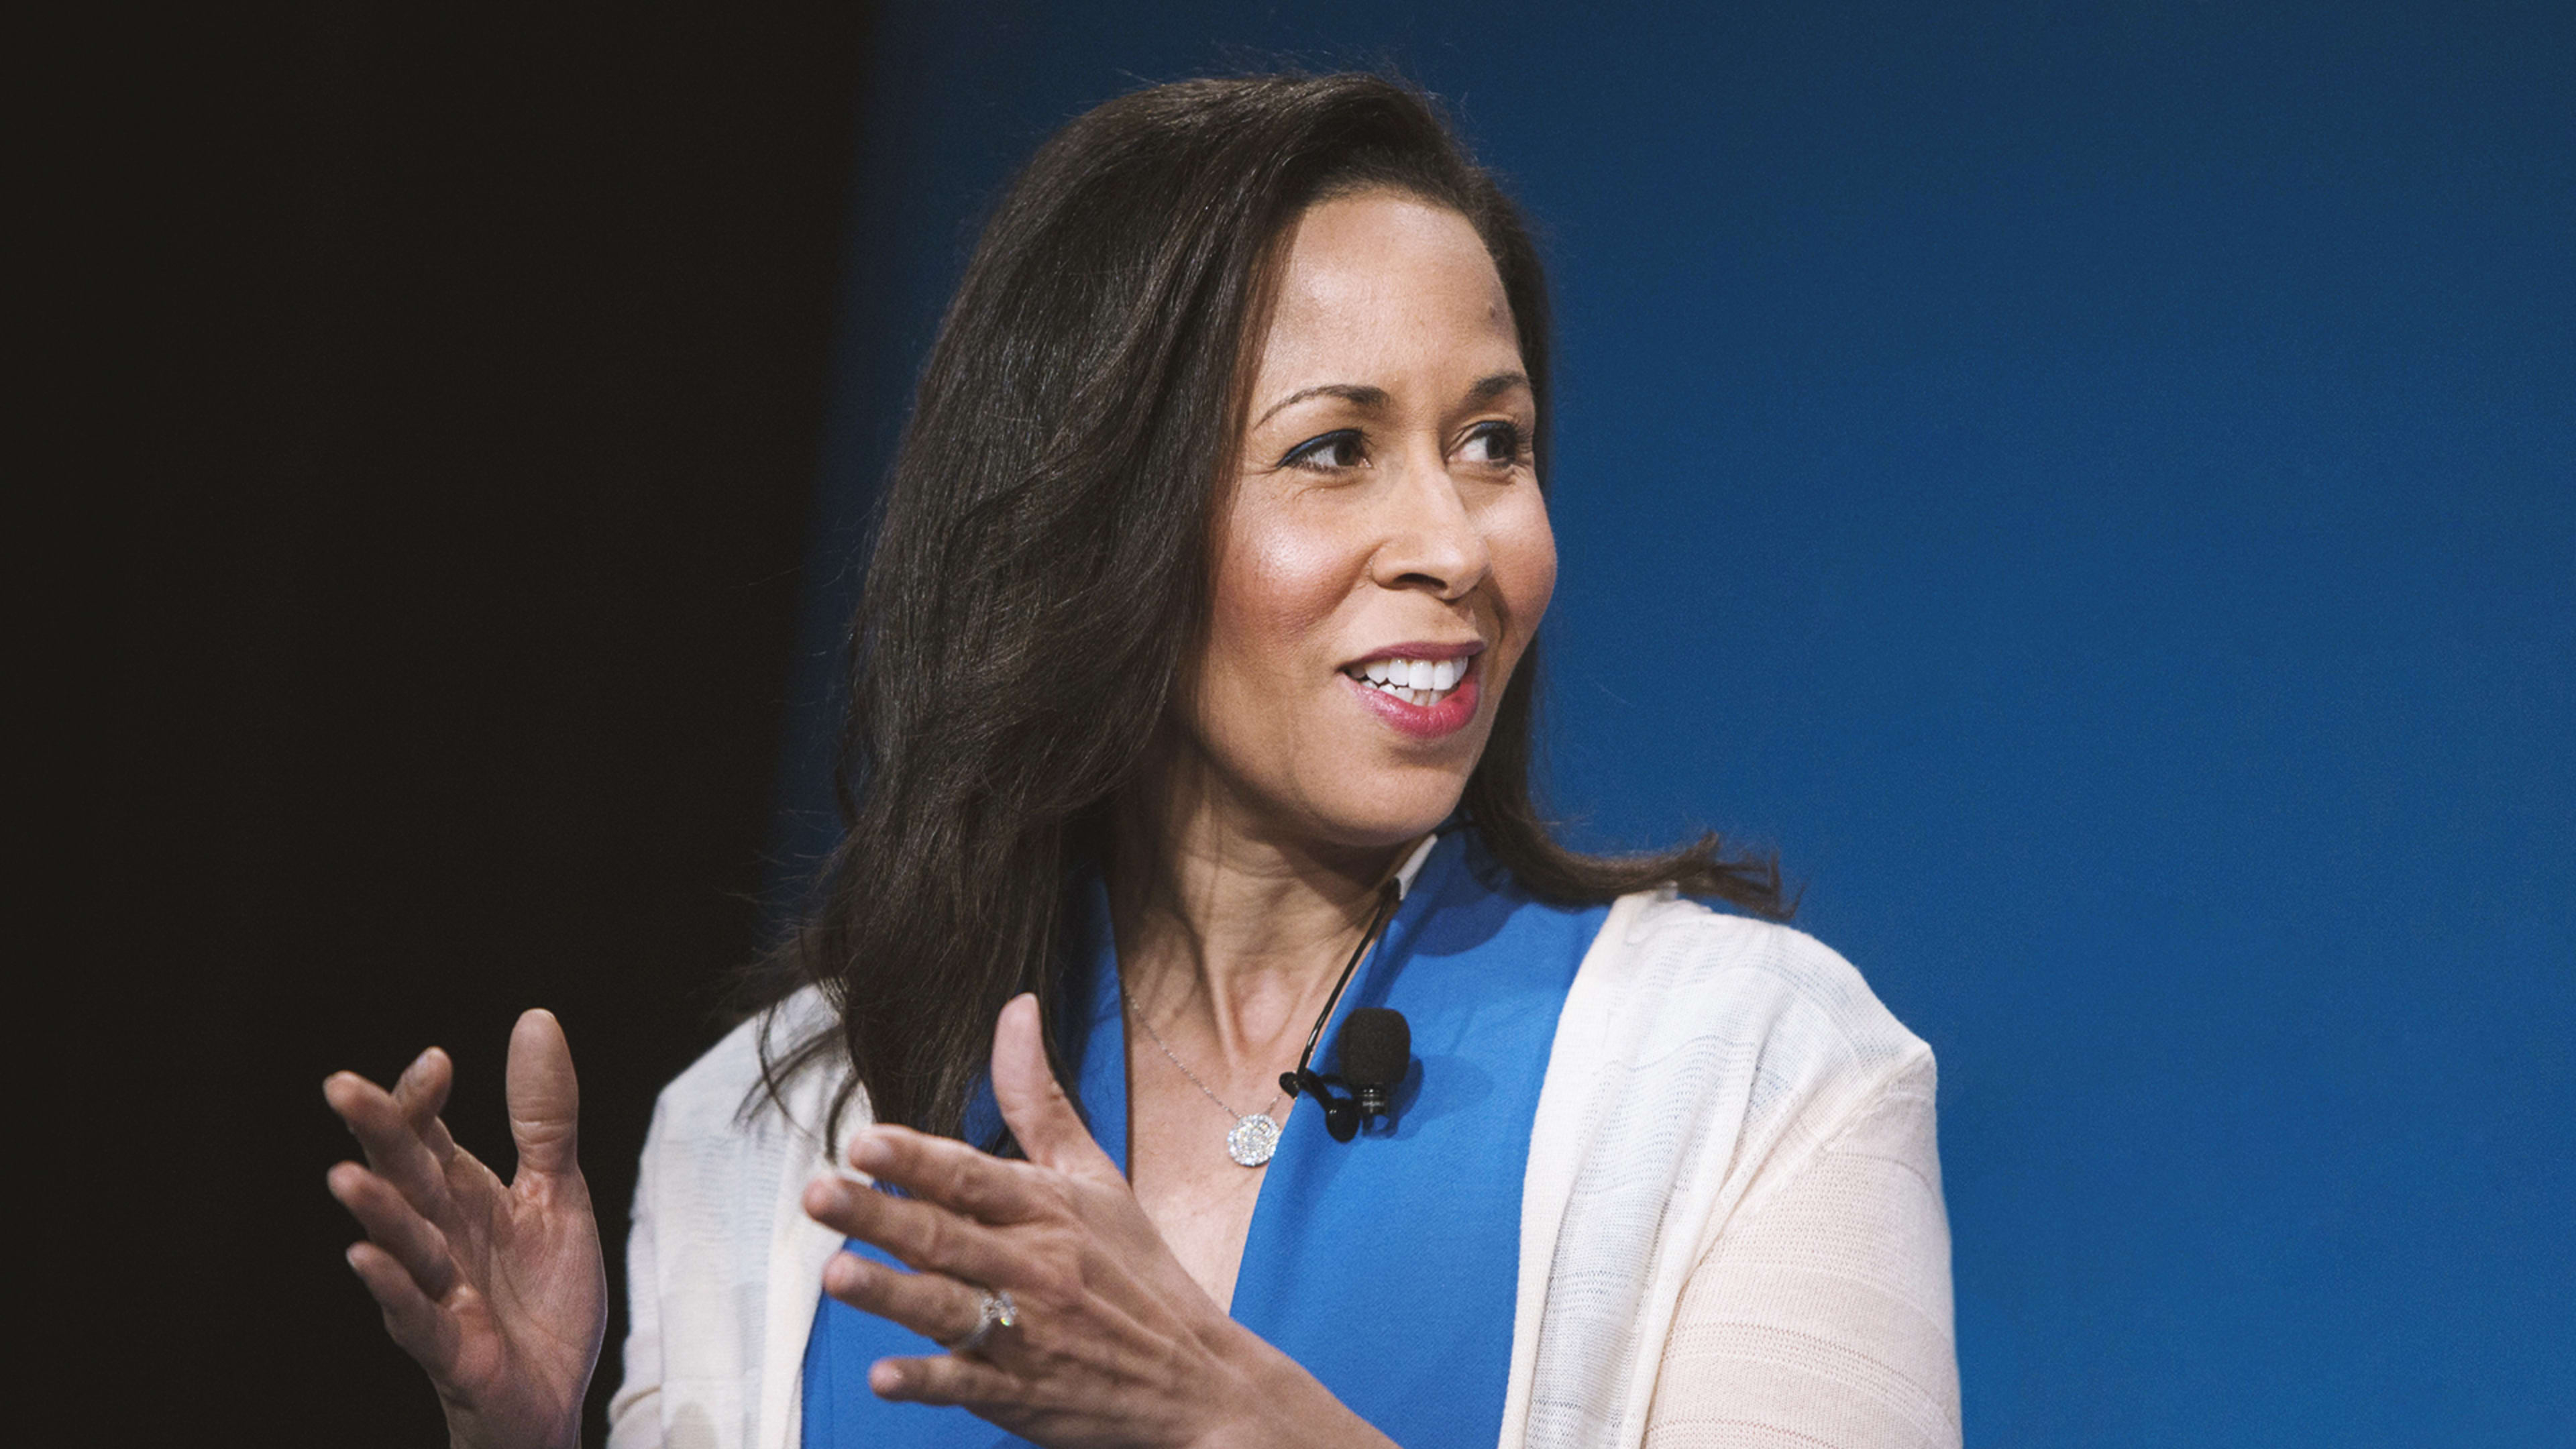 Facebook taps Peggy Alford as its first black female board member